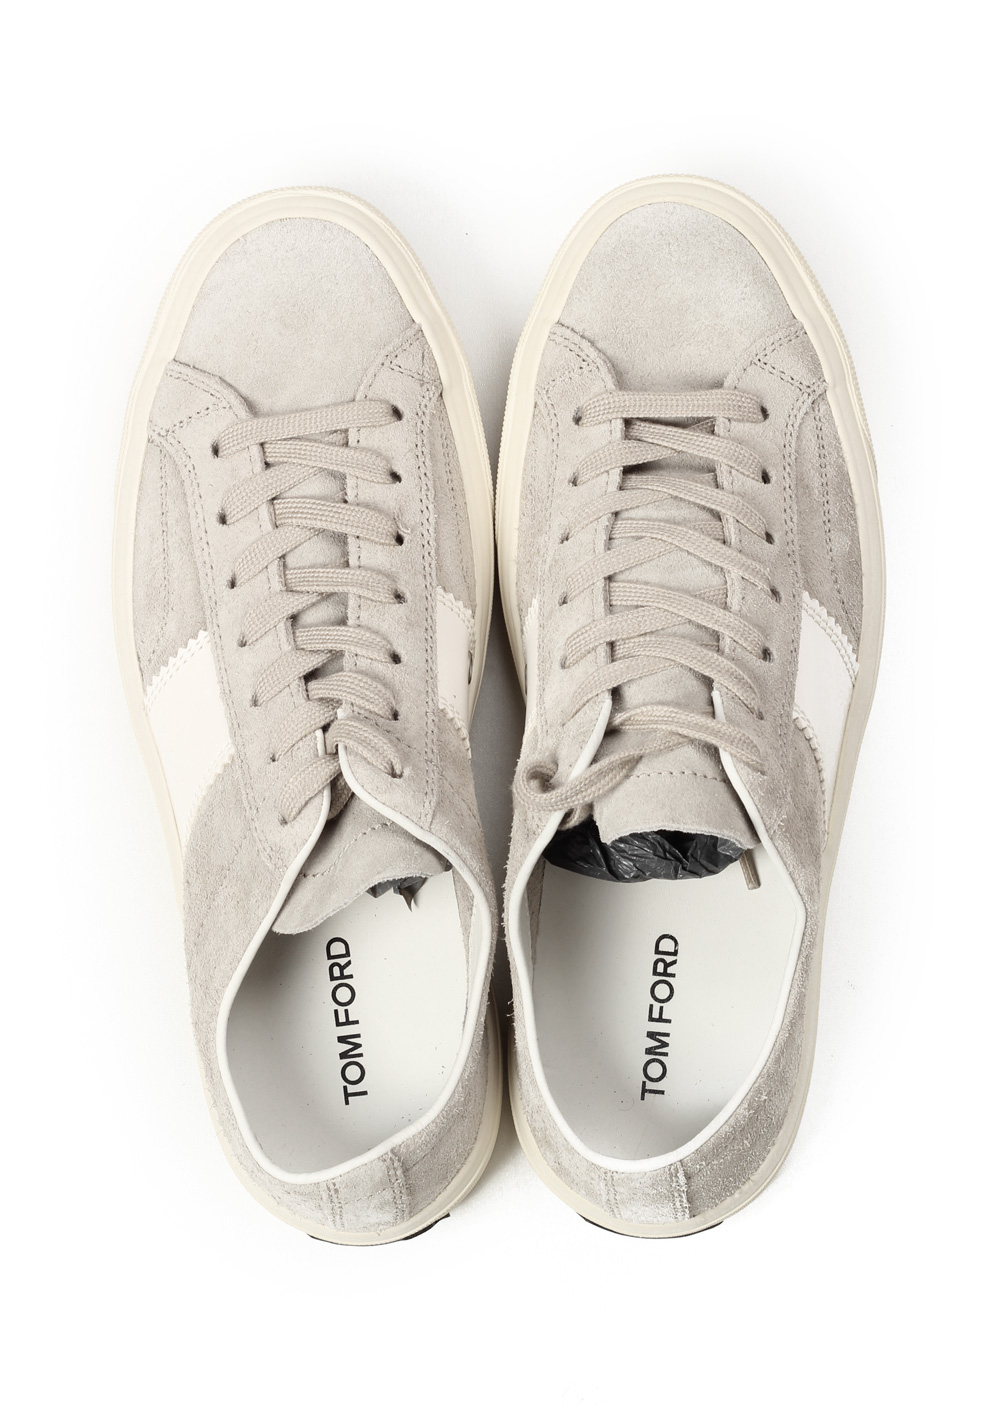 TOM FORD Cambridge Lace Up Gray Suede Sneaker Shoes Size 7,5 UK / 8,5 U.S. | Costume Limité